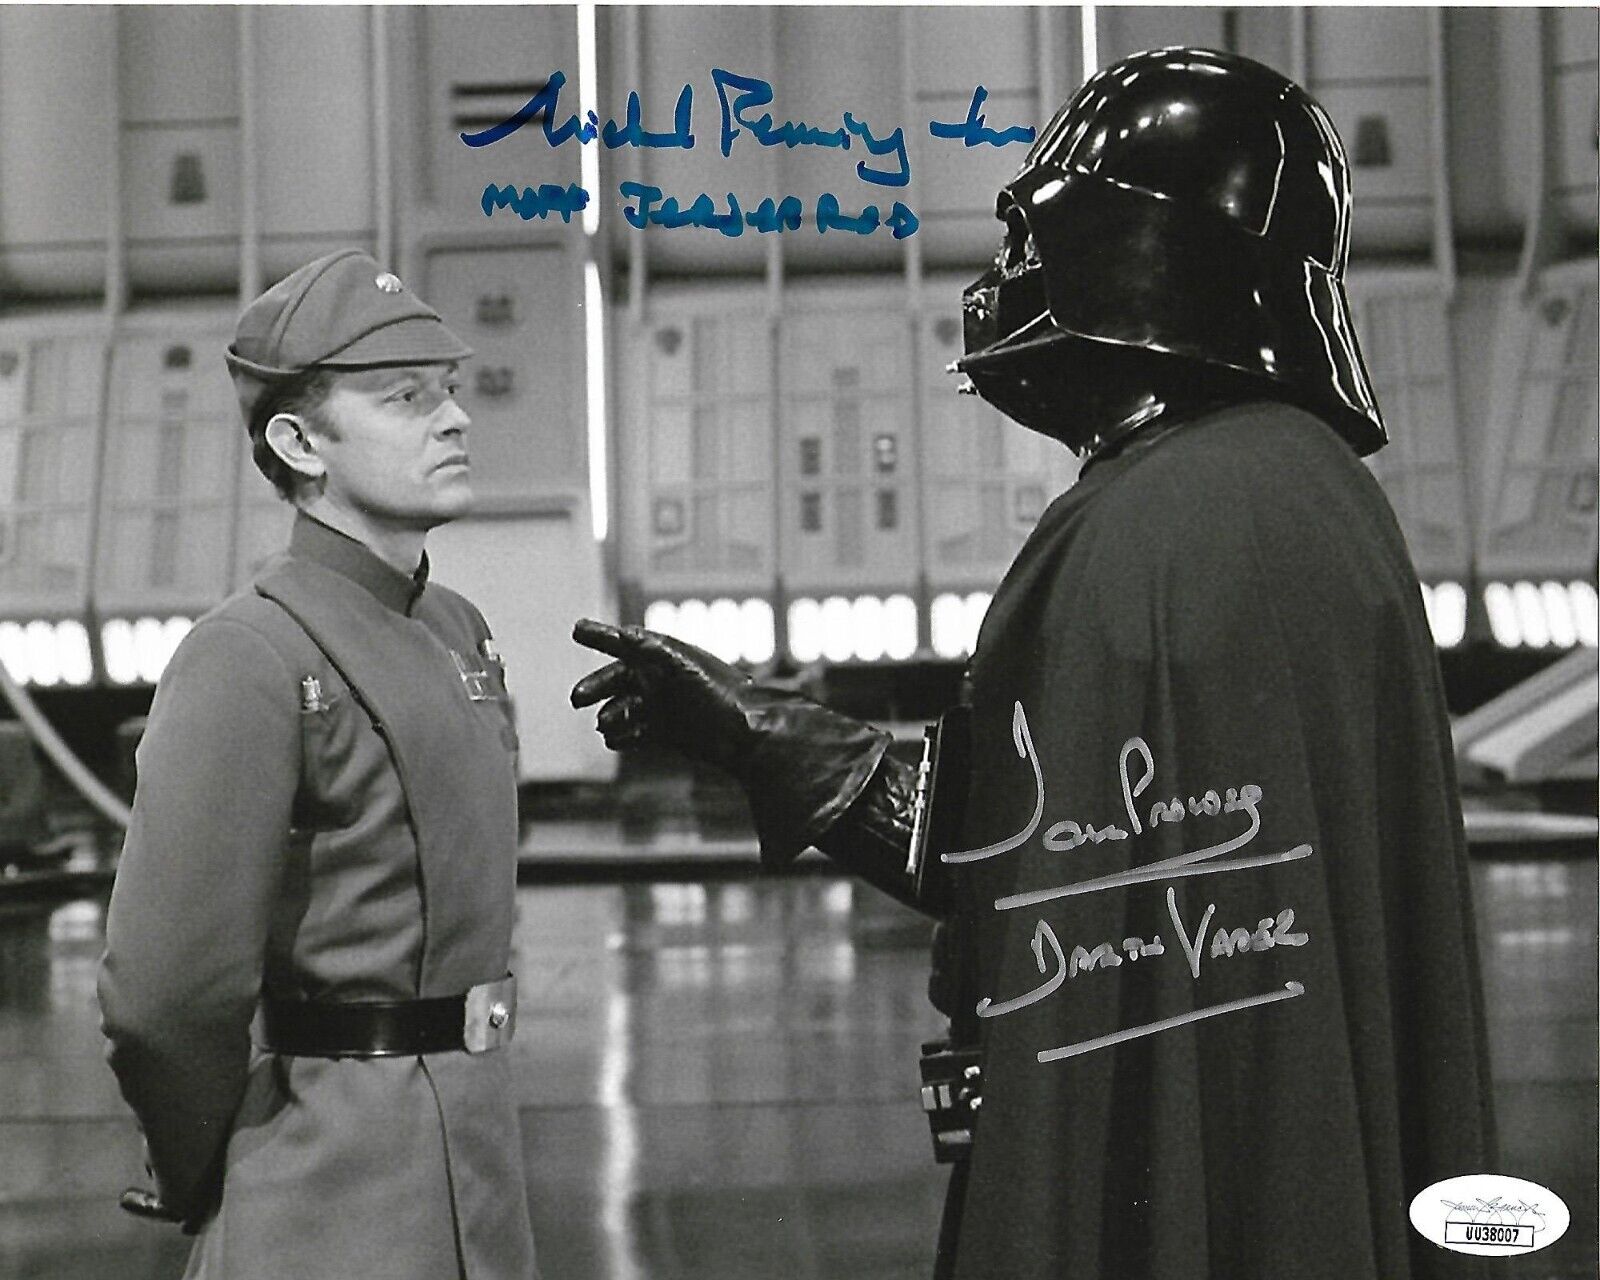 Dave Prowse and Michael Pennington Signed Star Wars Autographed Photo JSA